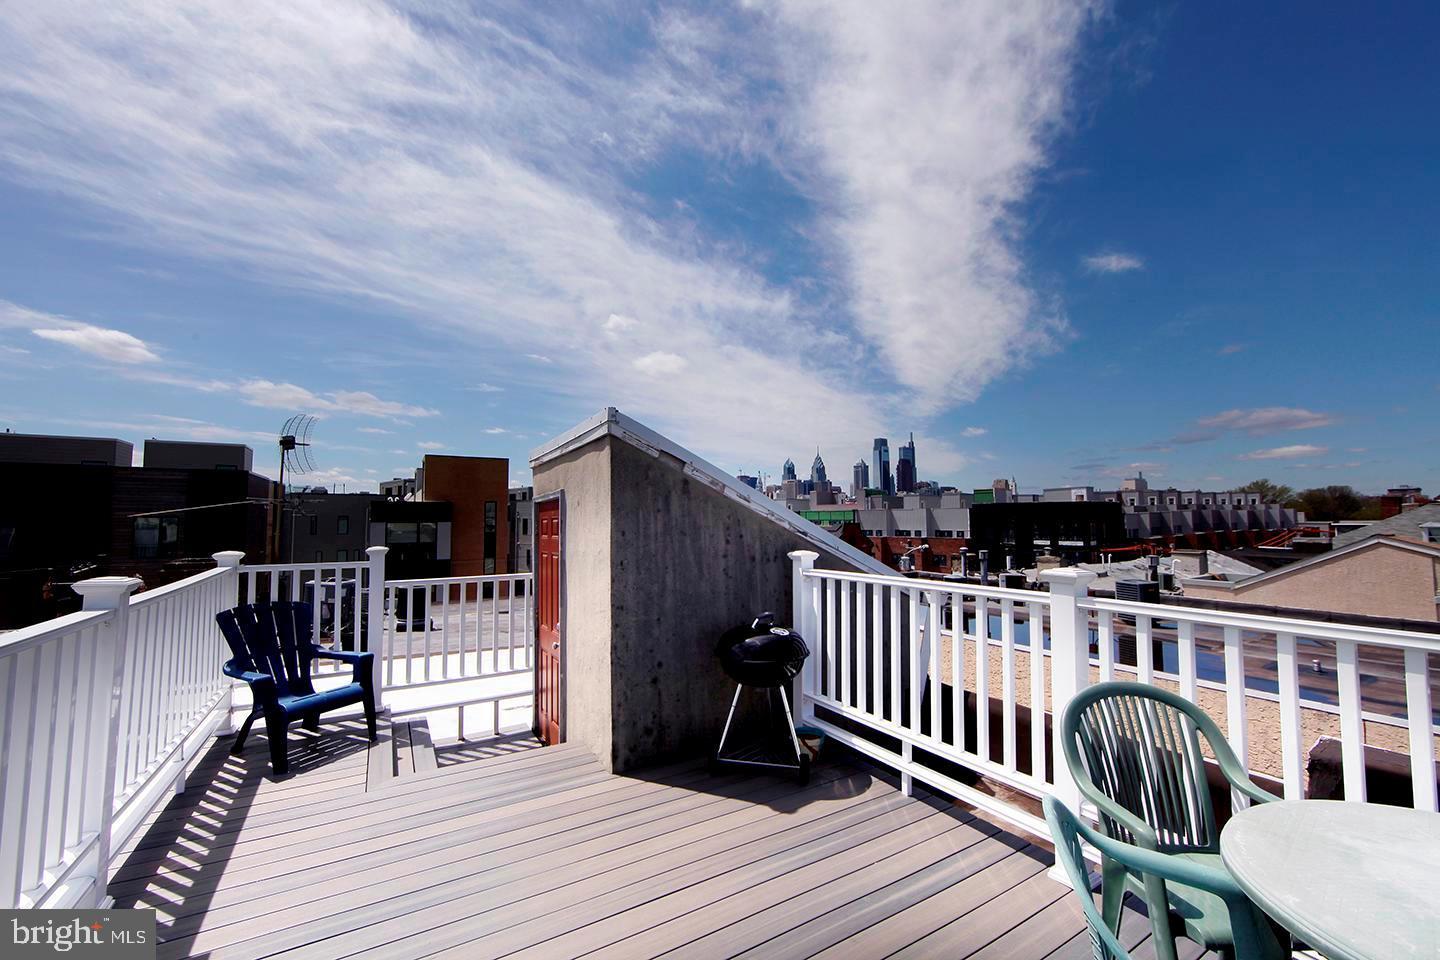 a view of a roof deck